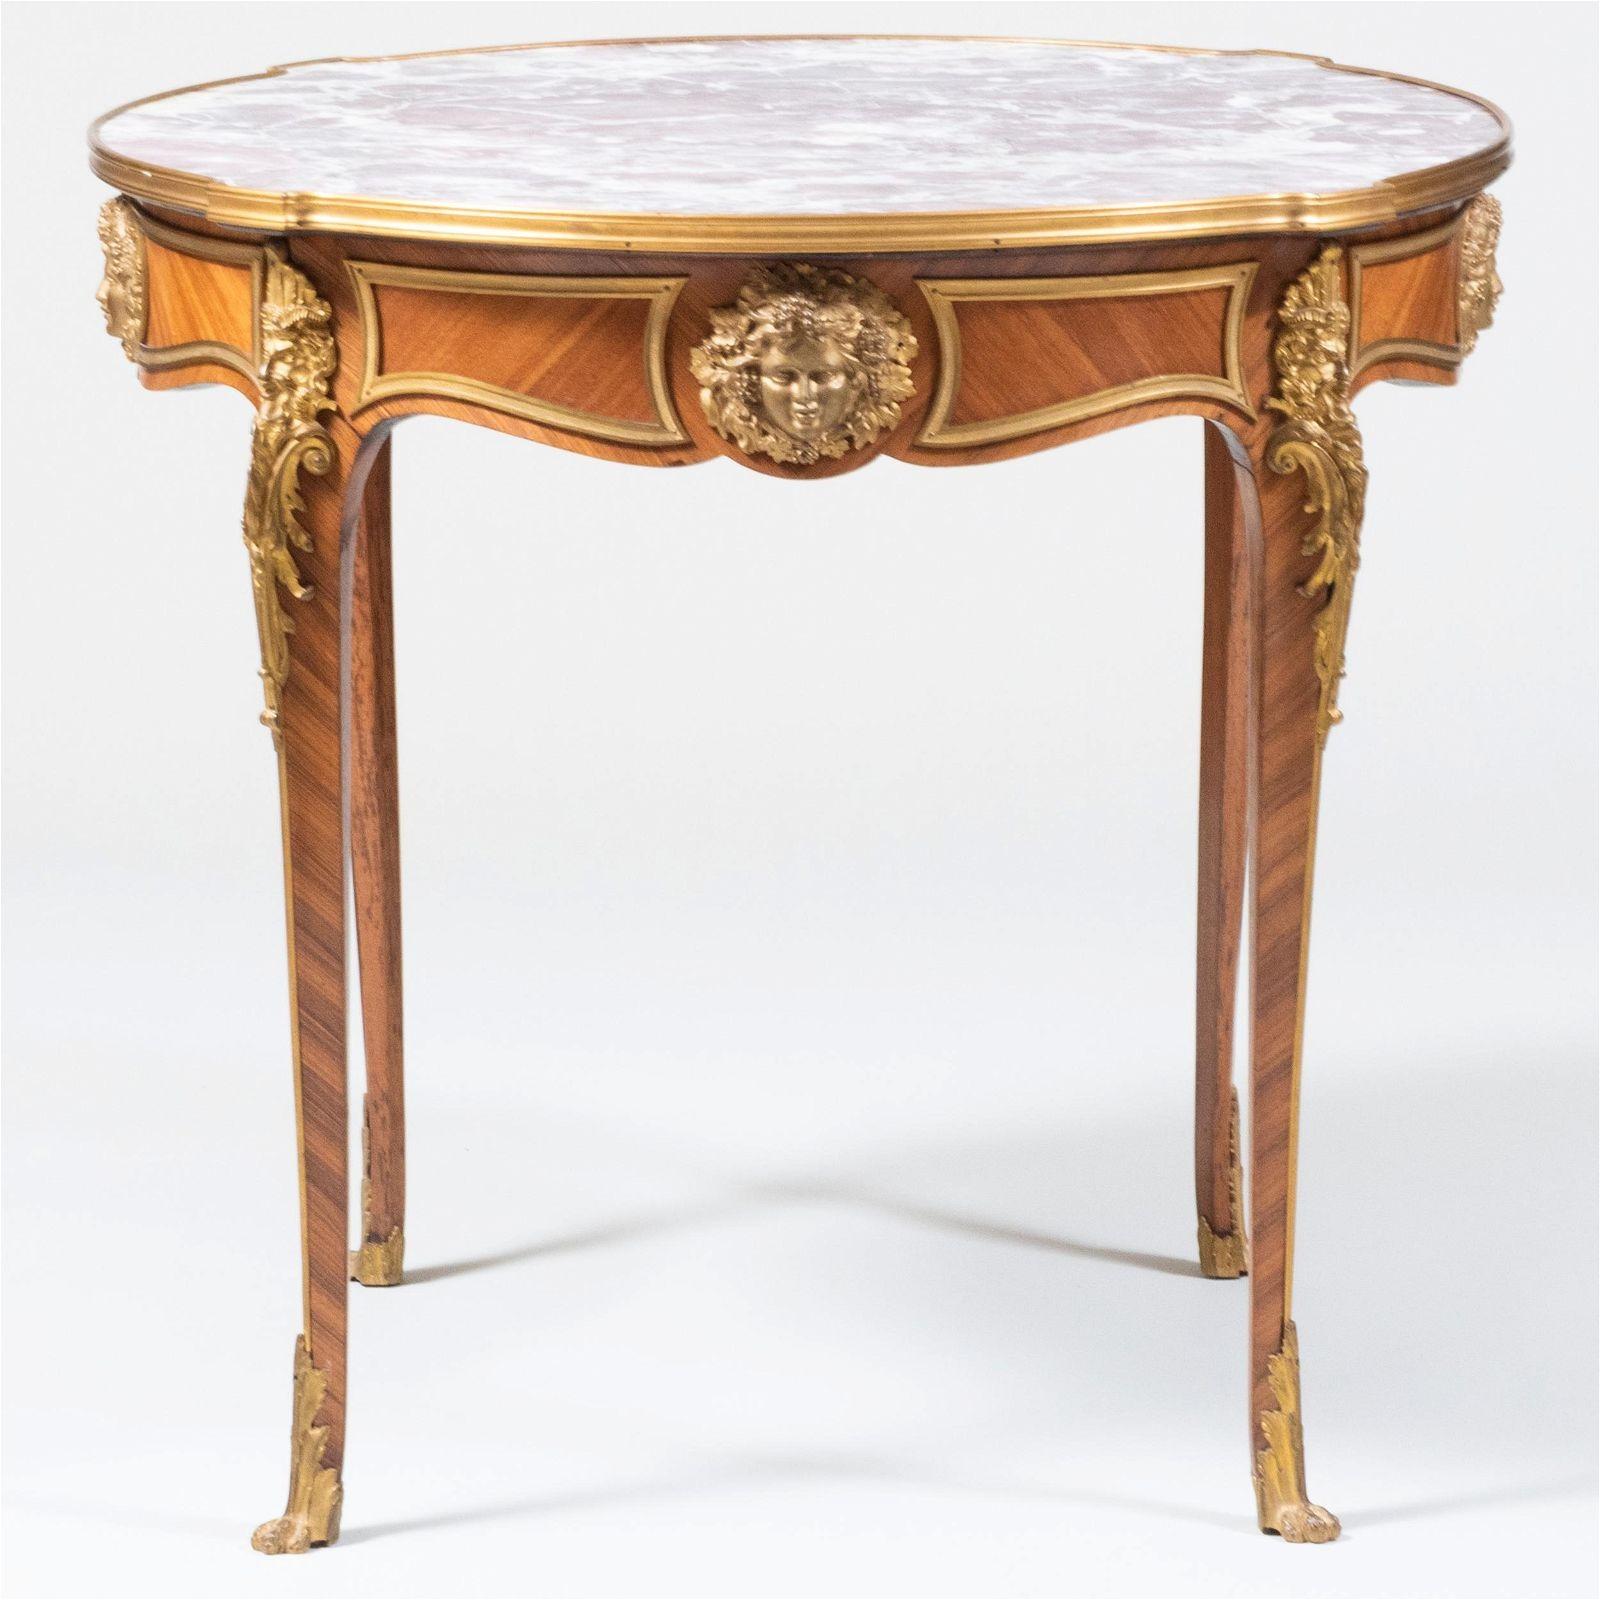 19th Century French Bronze Mounted Marble Top Center Table in Louis XV Style For Sale 1